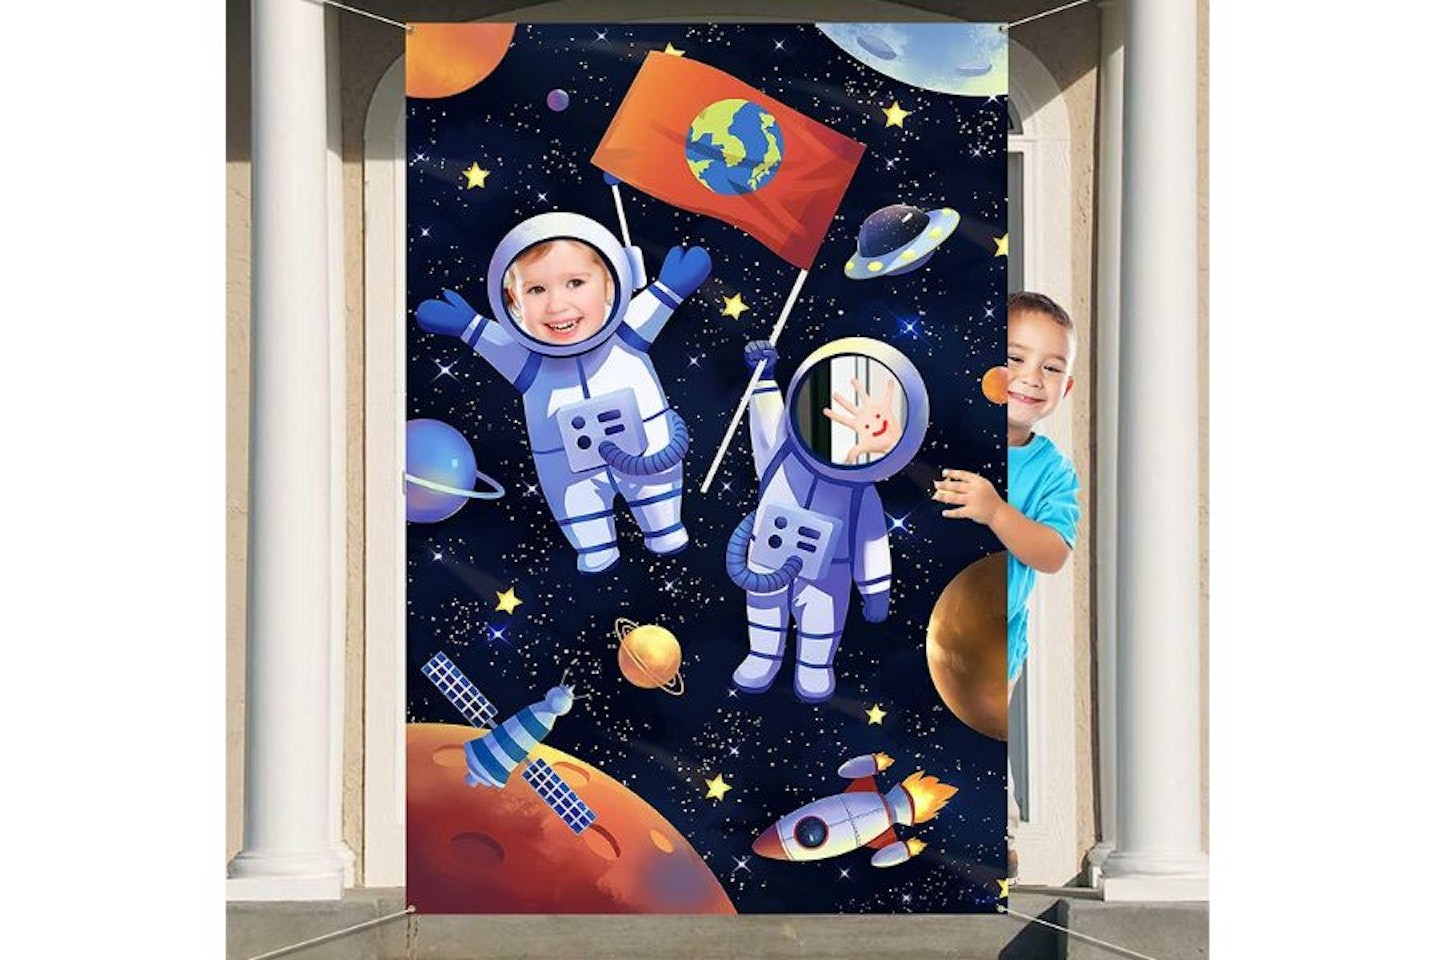 Space party ideas - DPKOW Outer Space Birthday Party Photo Prop